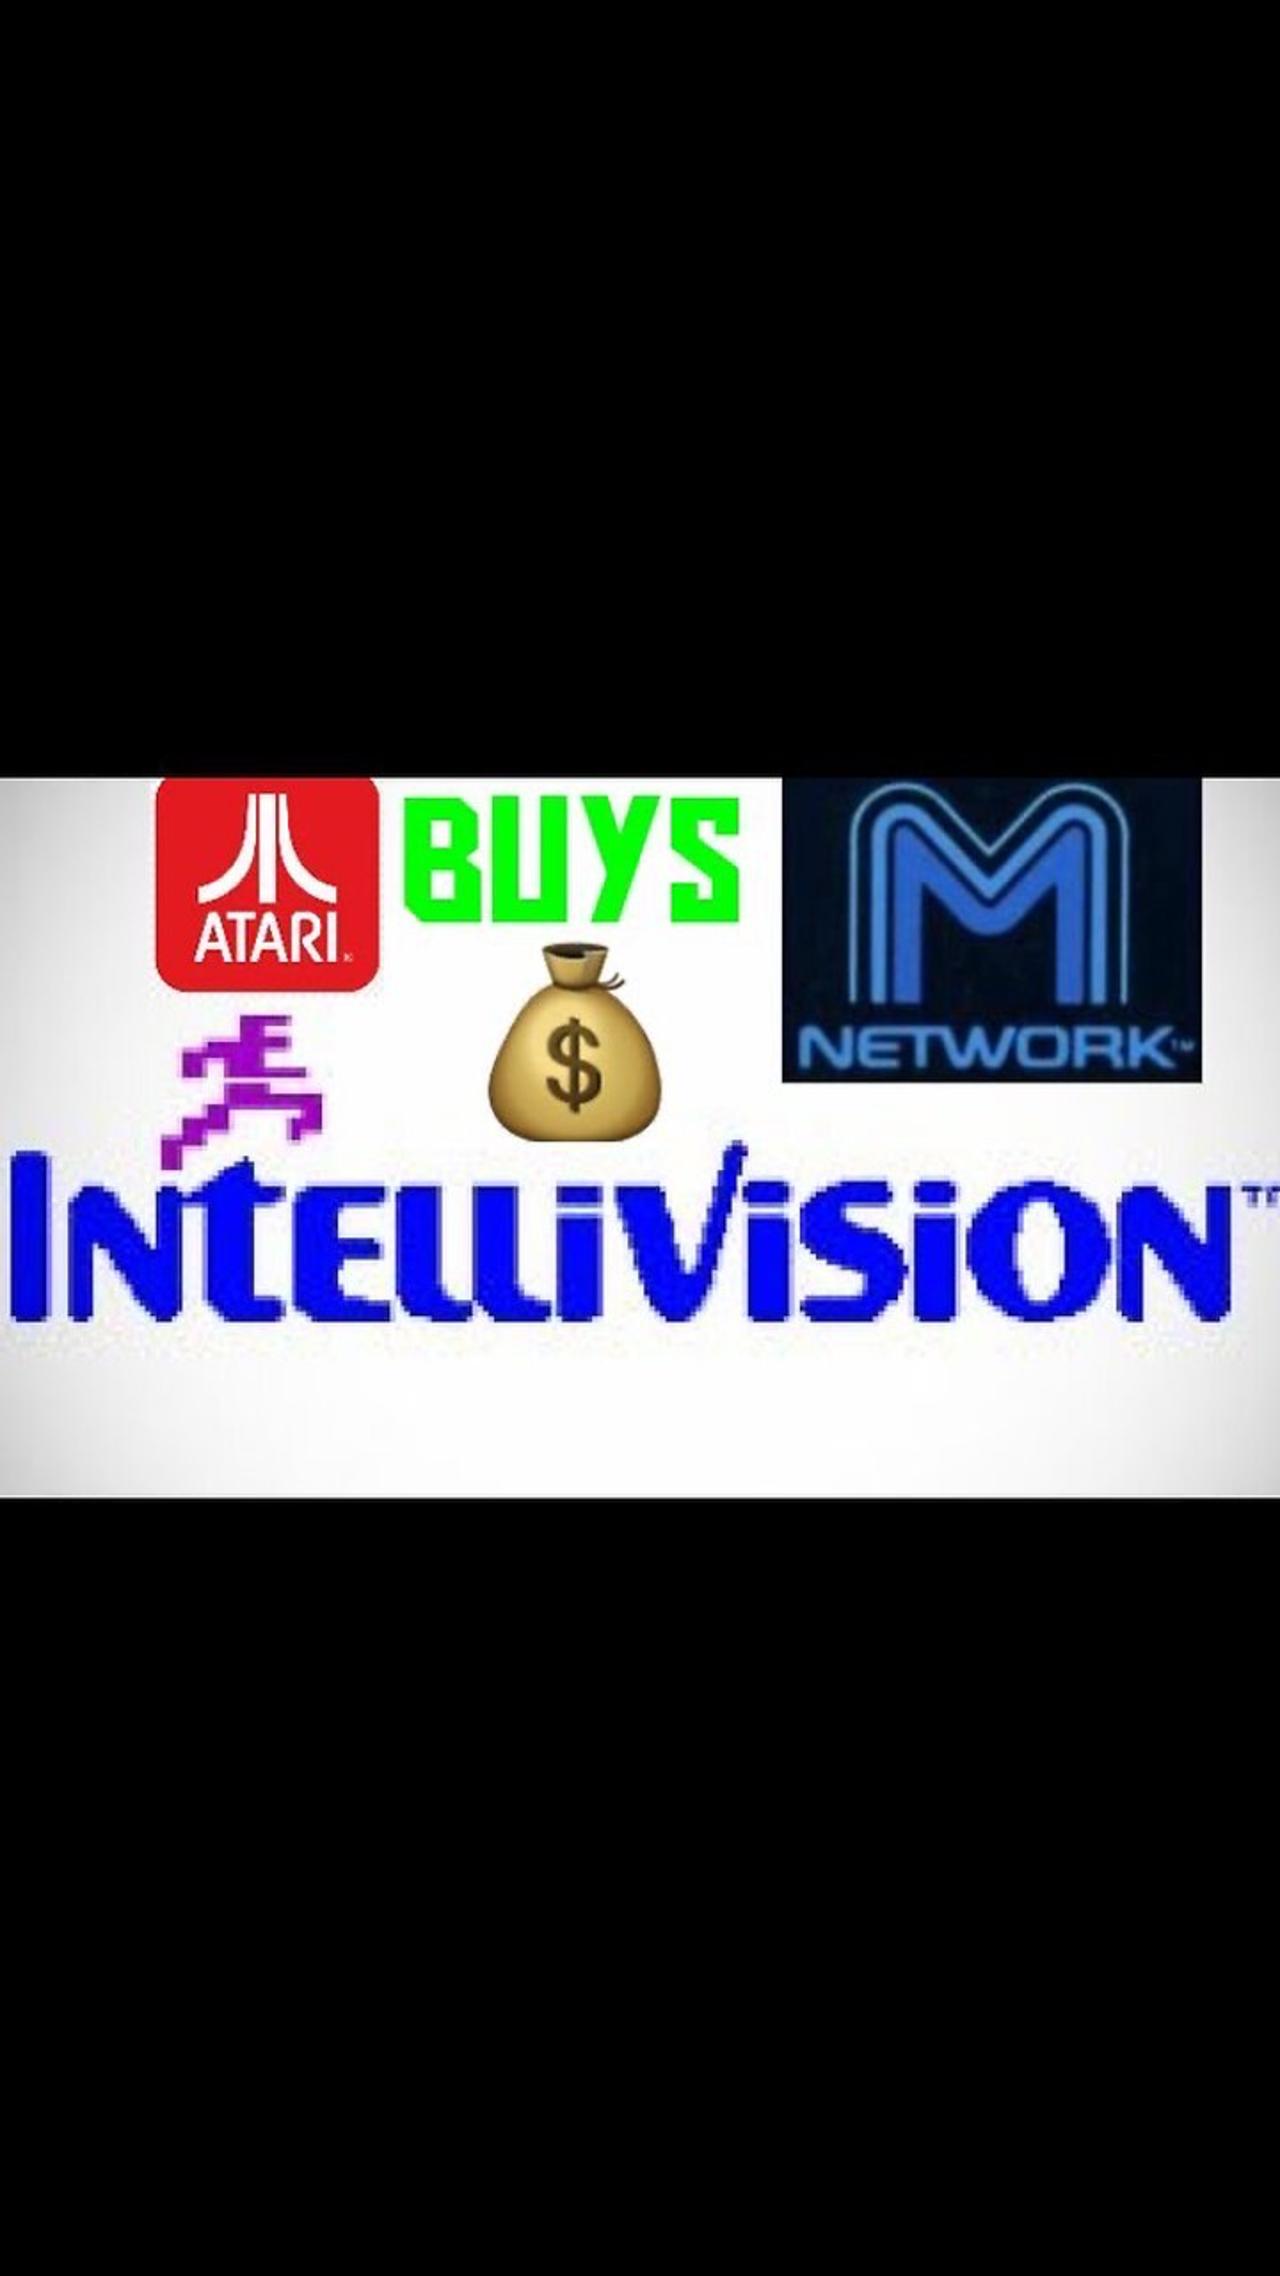 Atari Buys M Network Games From Intellivision